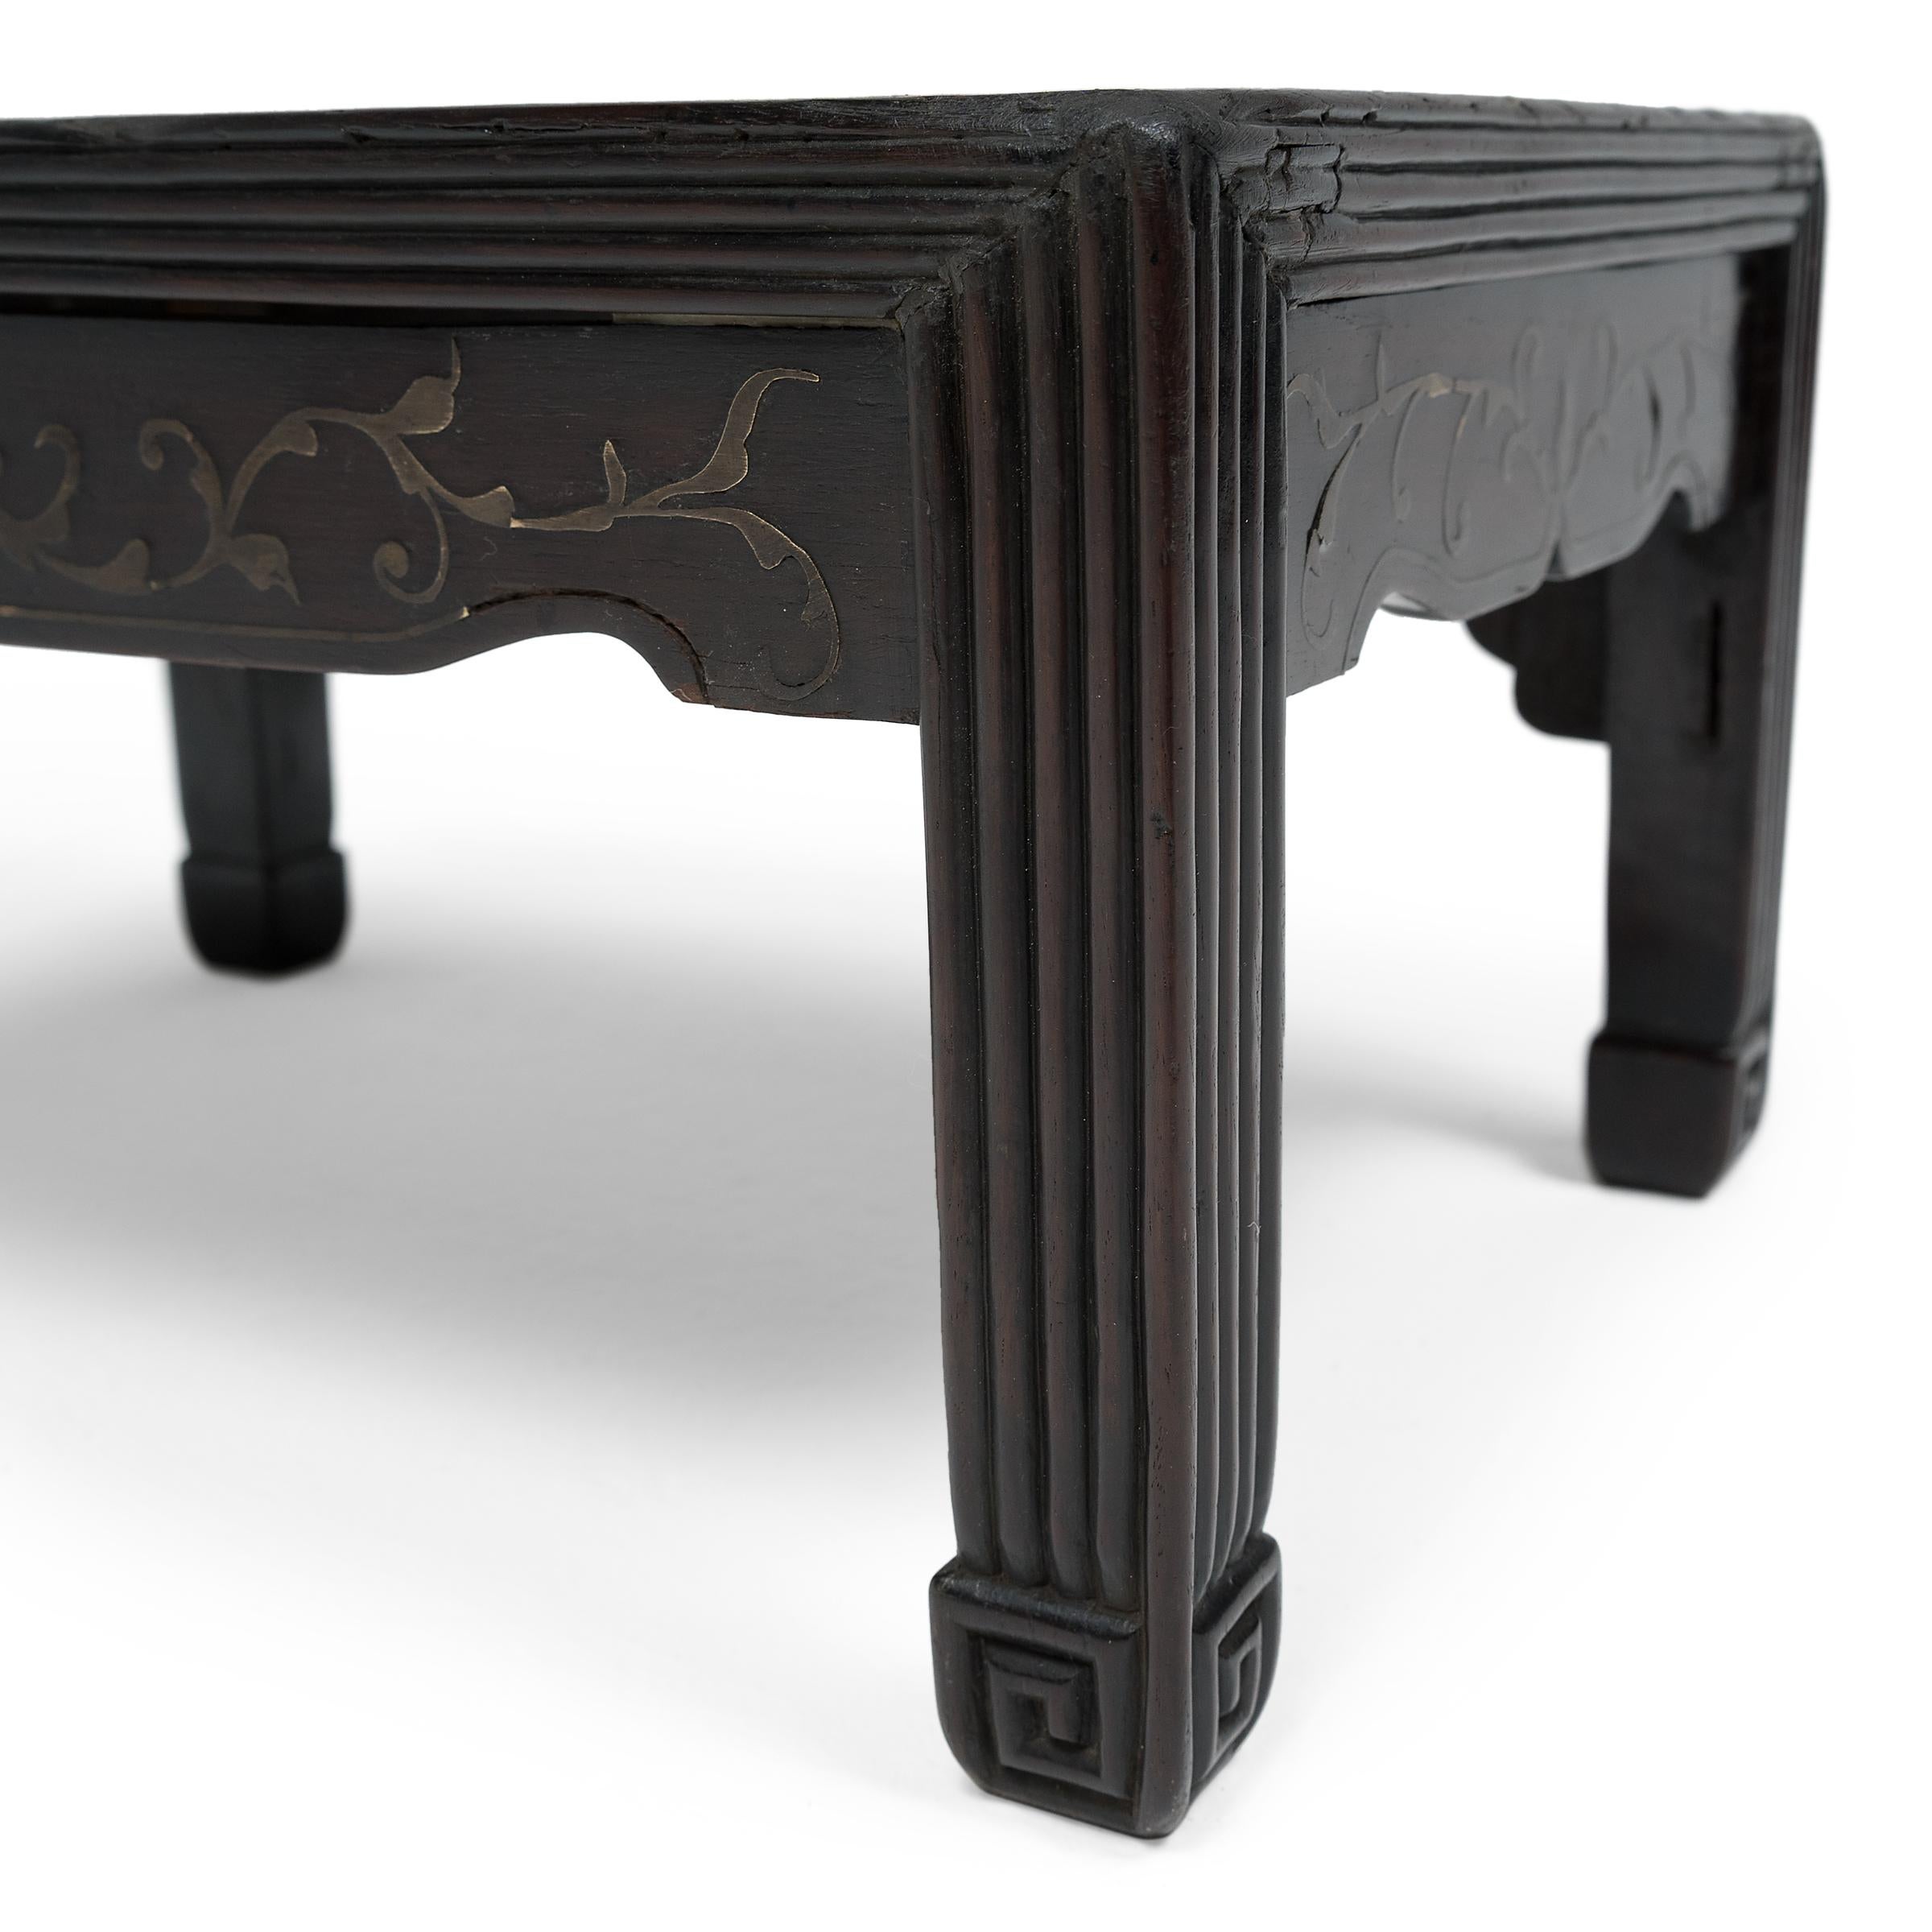 Qing Chinese Kang Table with Ridged Legs, c. 1800